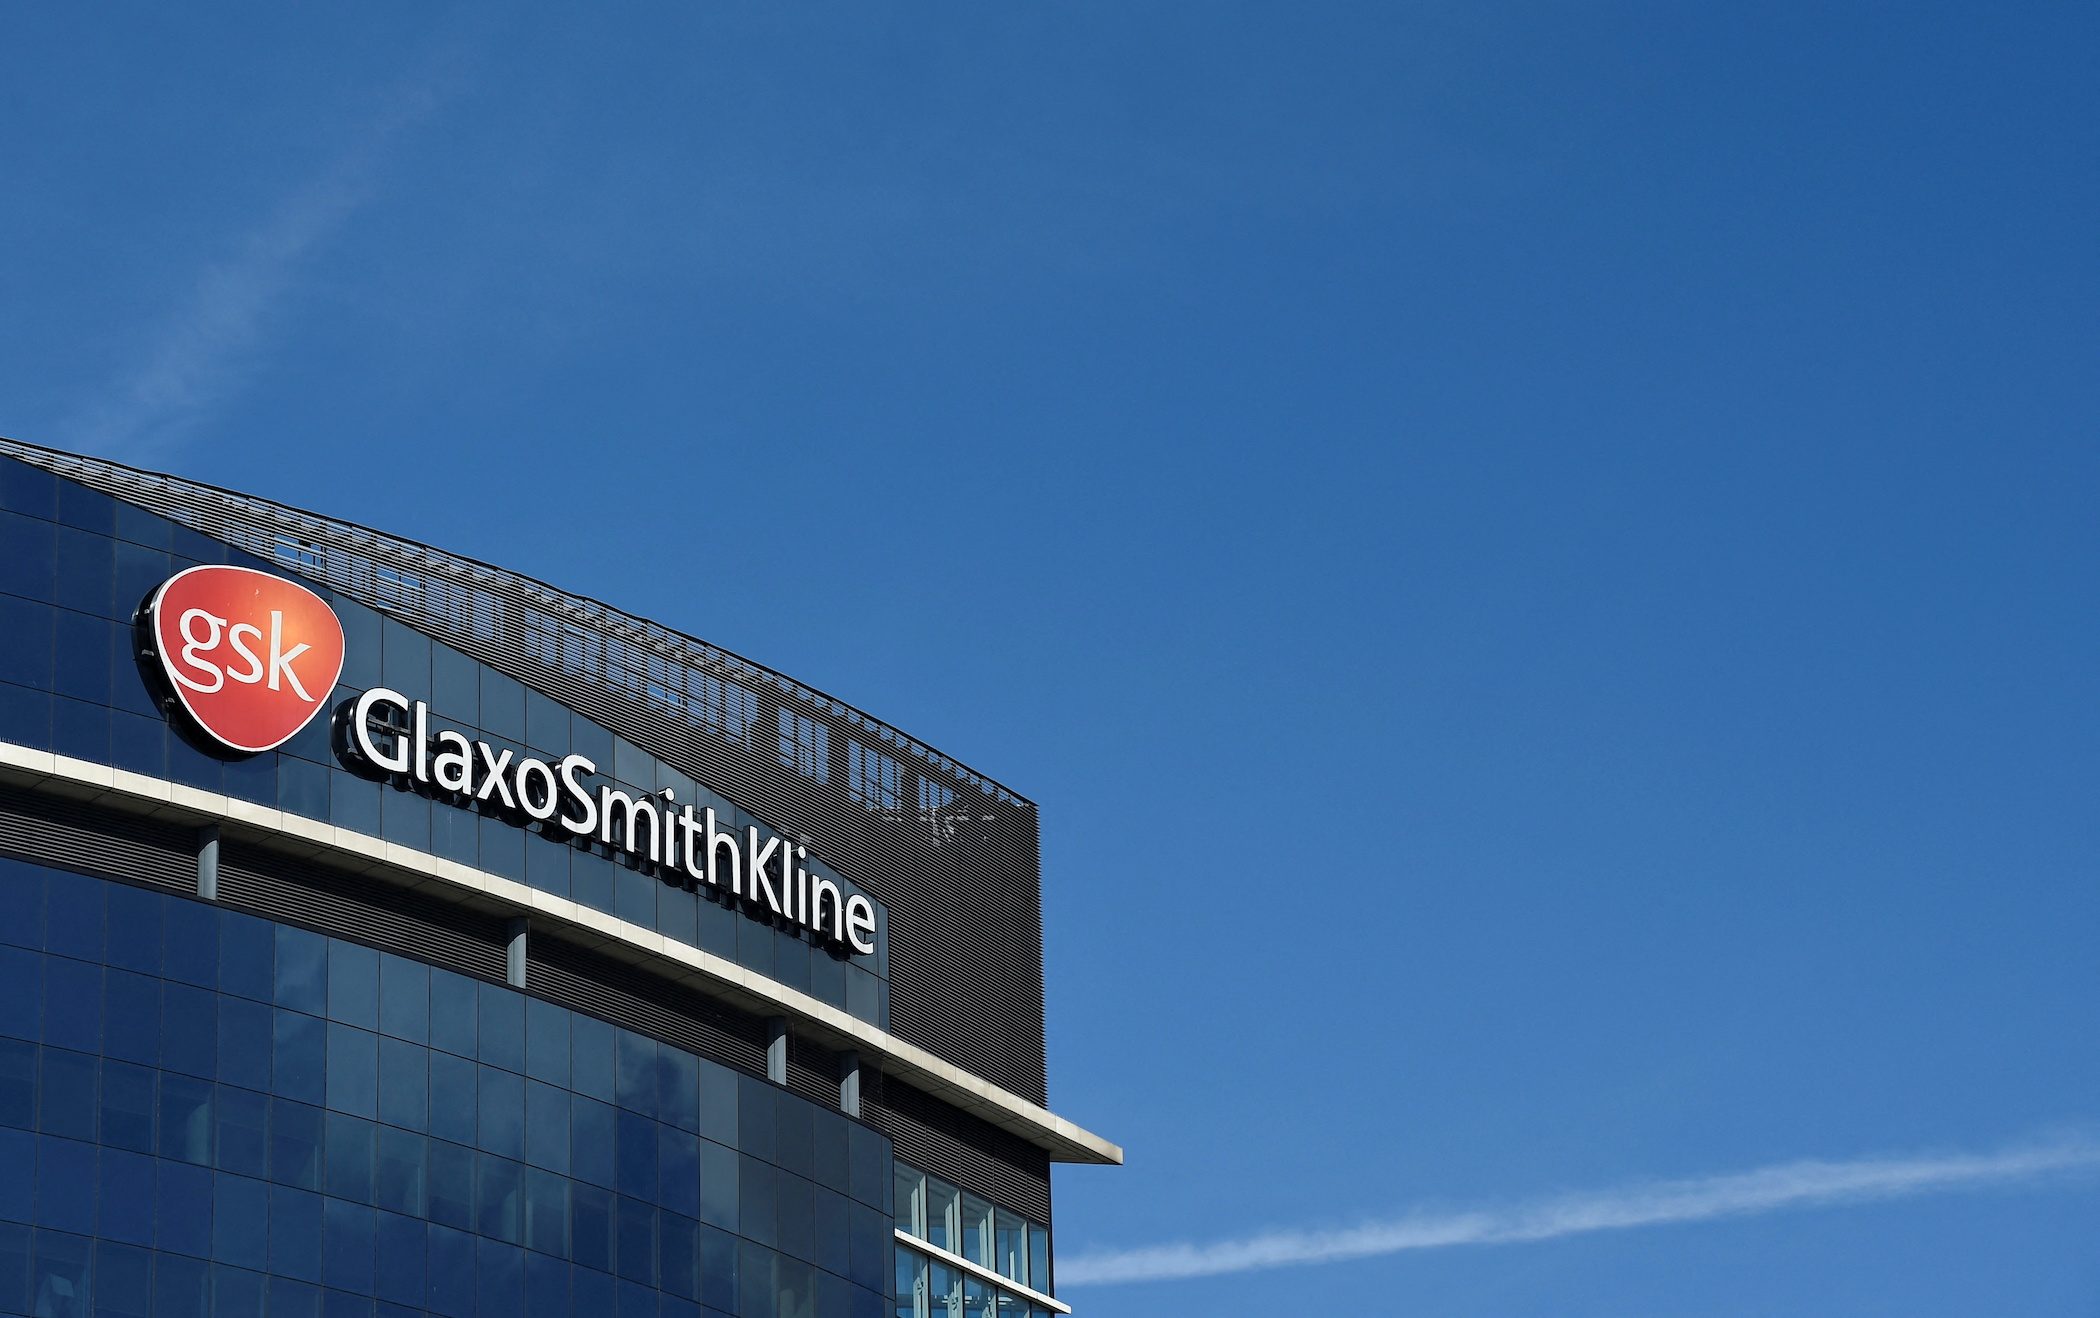 Drugmaker GSK cuts ties with Russia government over Ukraine crisis